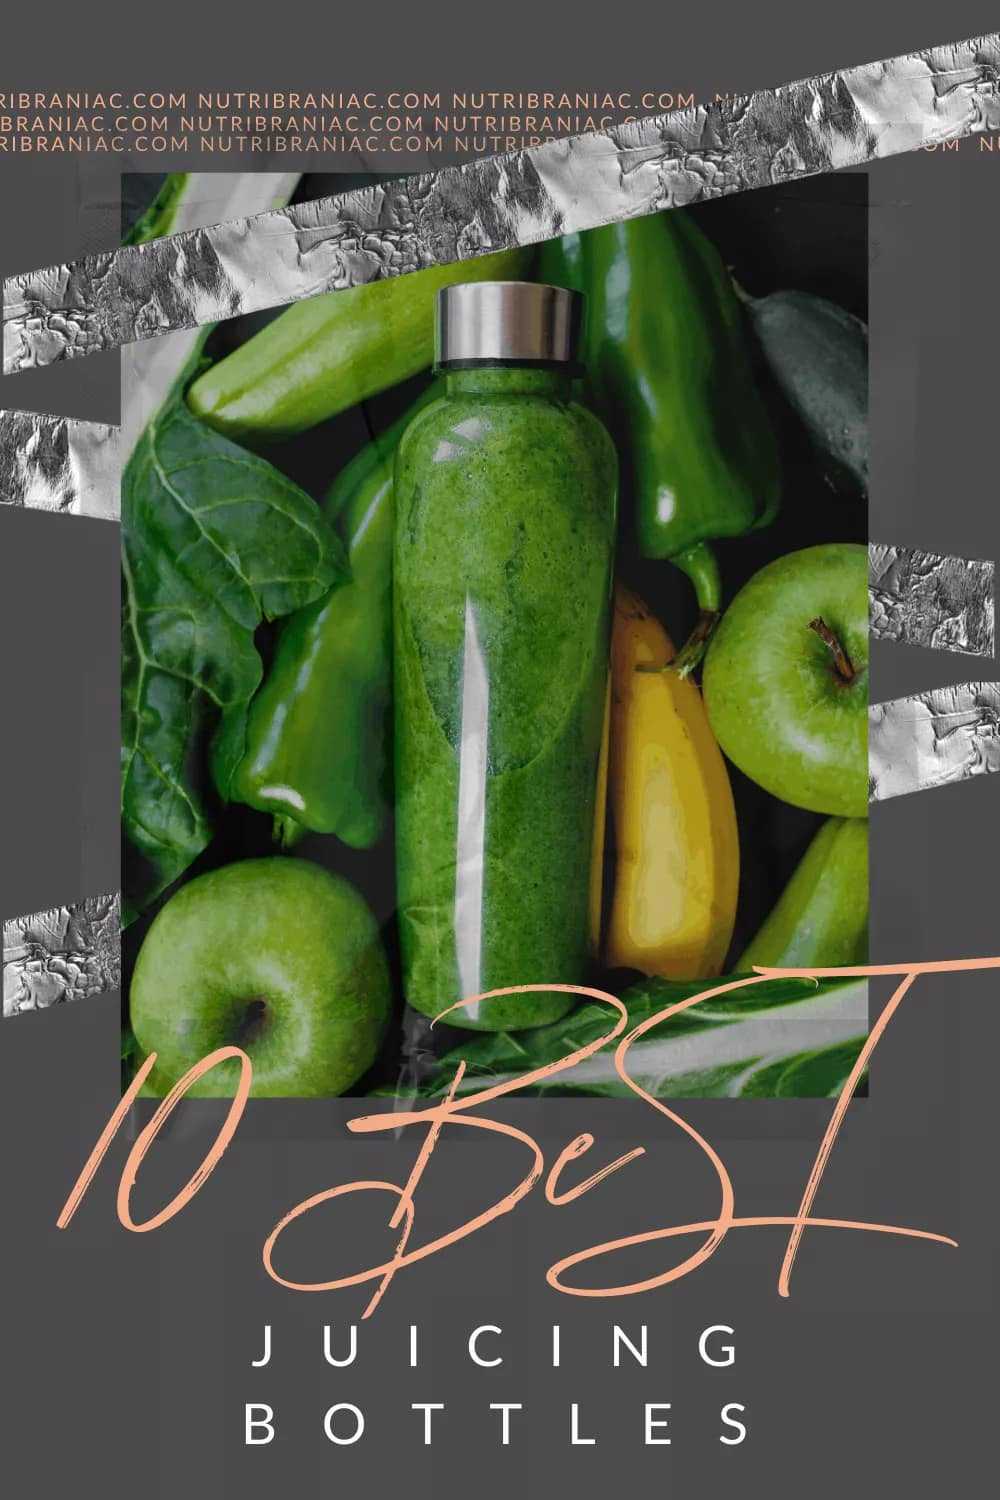 Graphic pin image of a glass juice bottle surrounded by green vegetables with text overlay "10 Best Juicing Bottles"